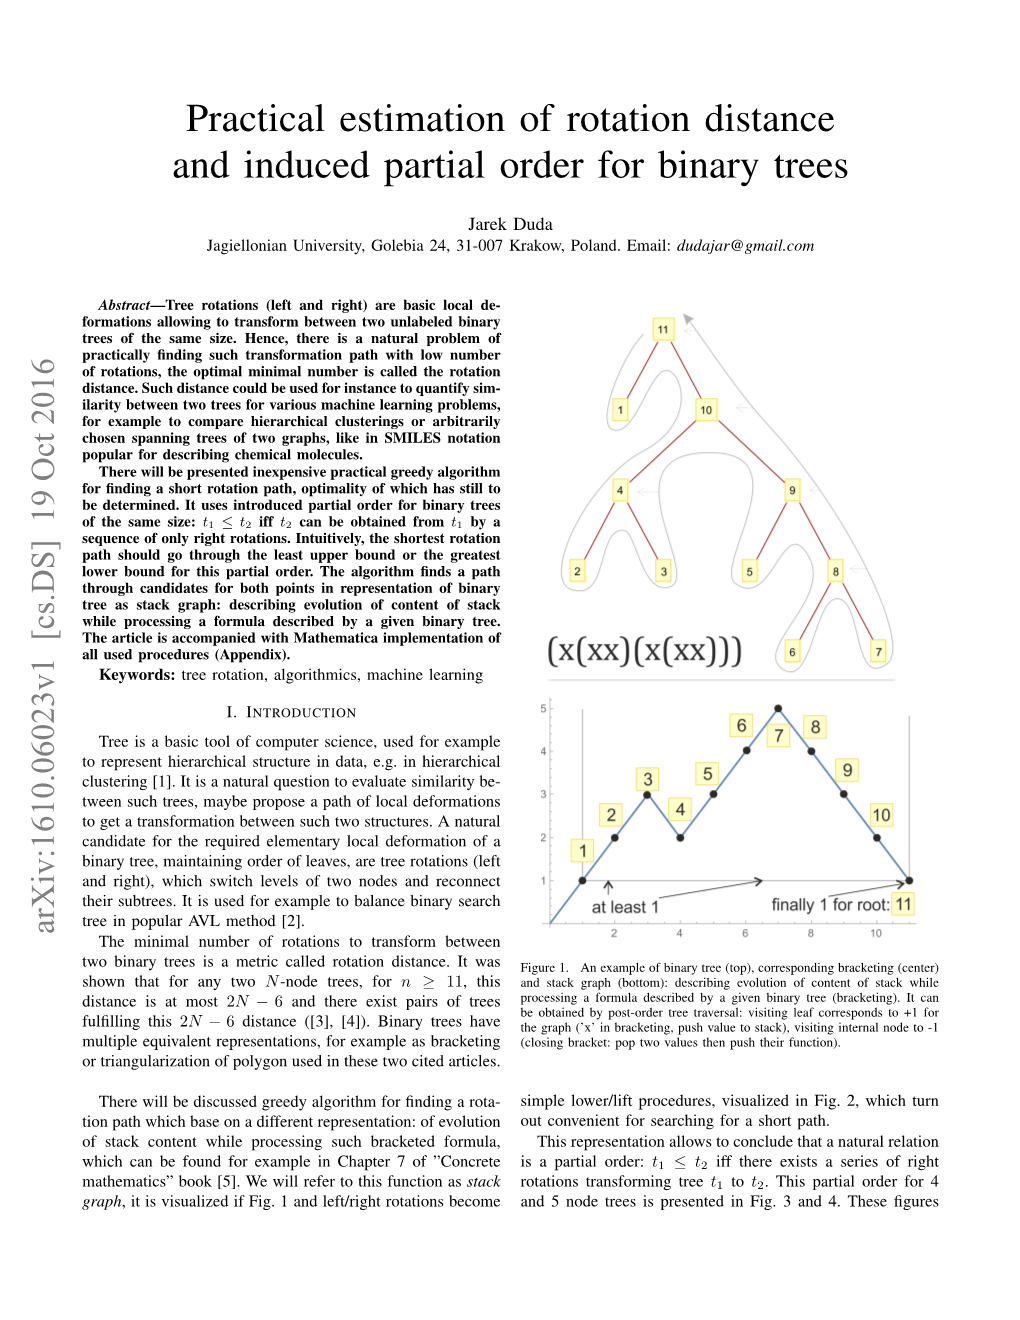 Practical Estimation of Rotation Distance and Induced Partial Order for Binary Trees